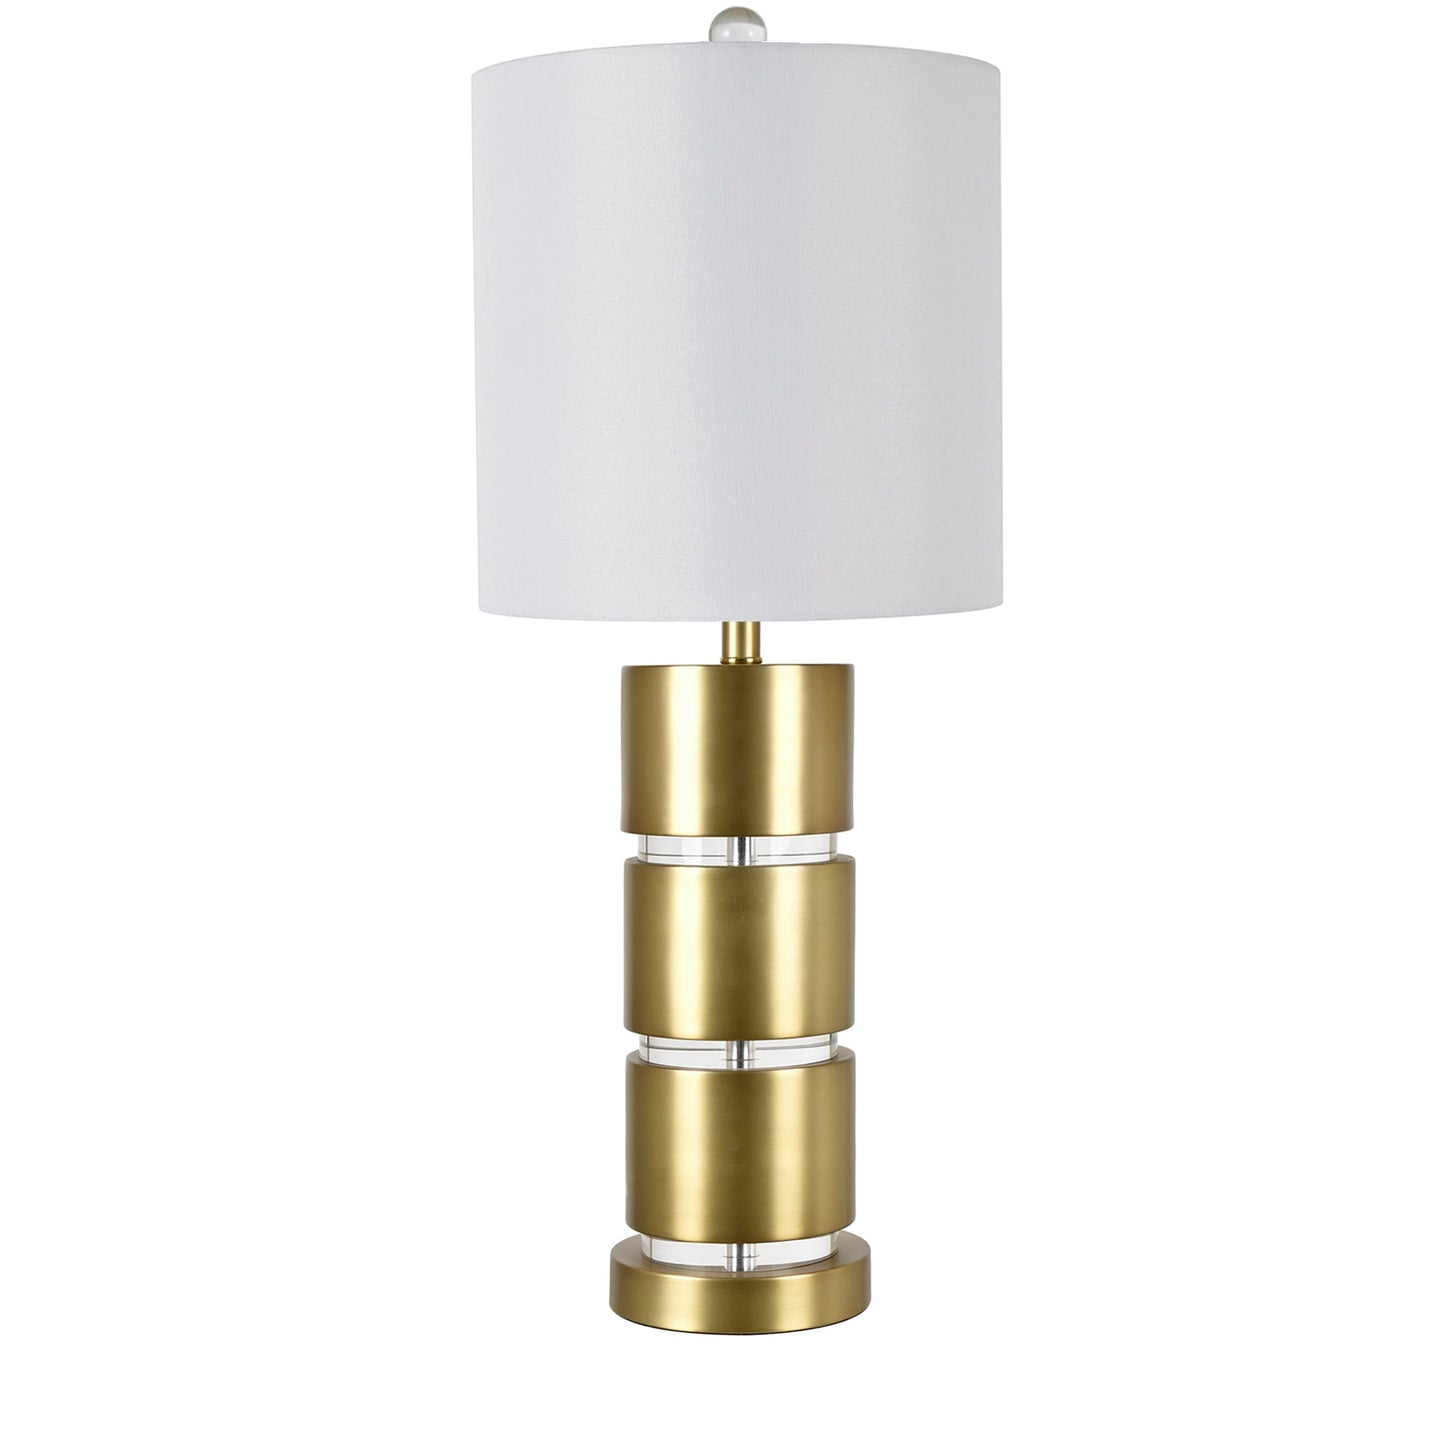 Casey Gold Table Lamp With Nightlight